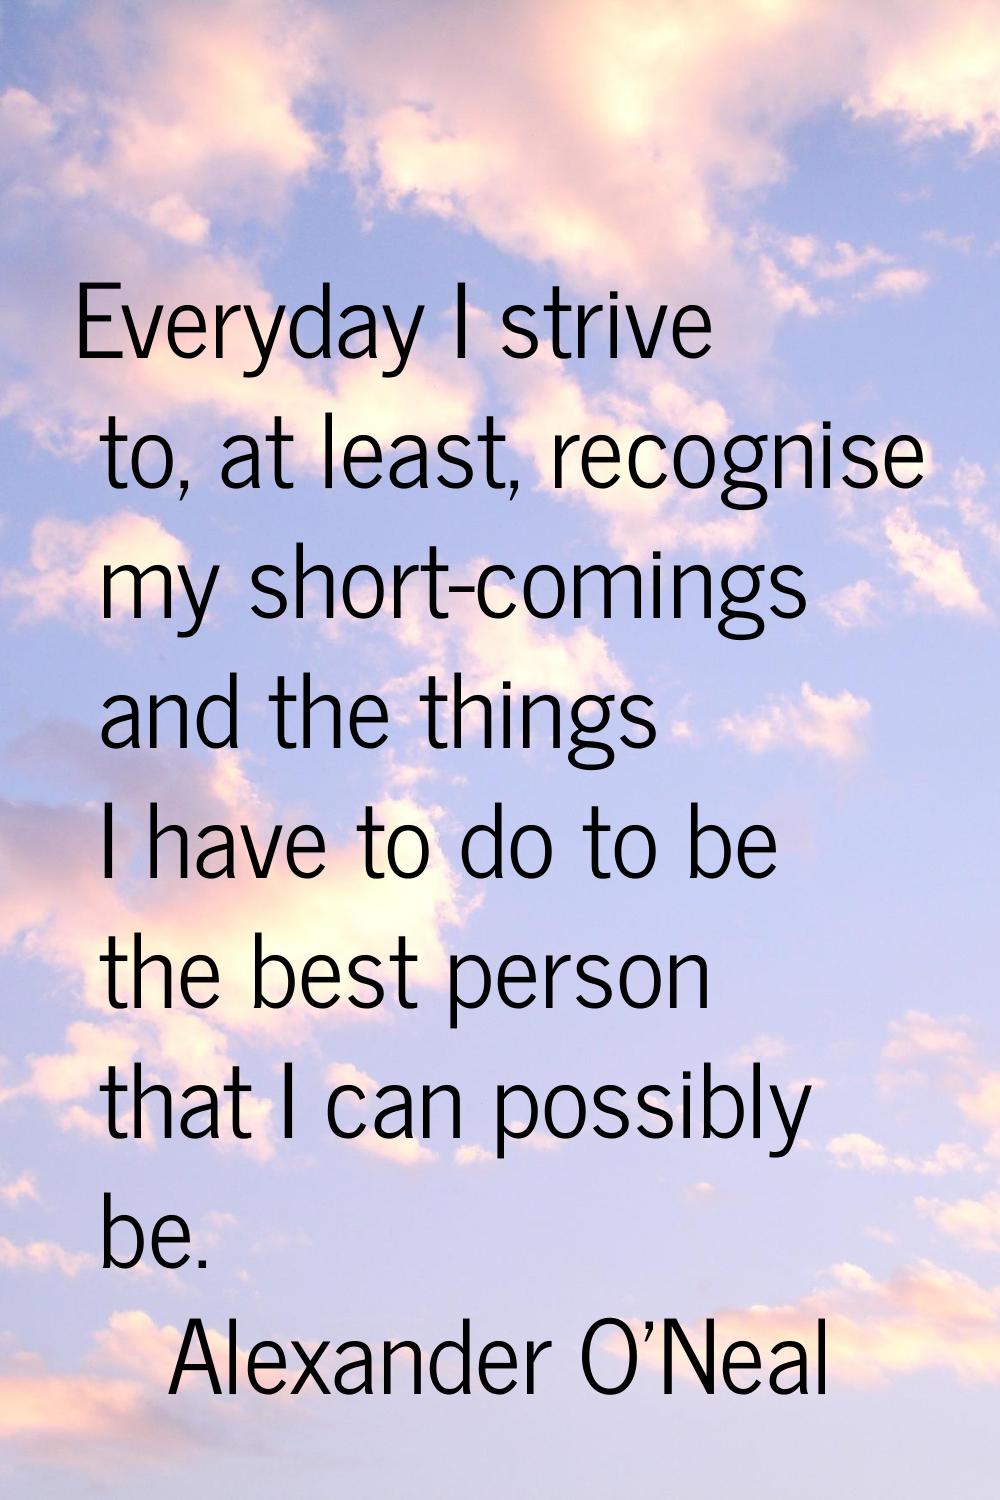 Everyday I strive to, at least, recognise my short-comings and the things I have to do to be the be